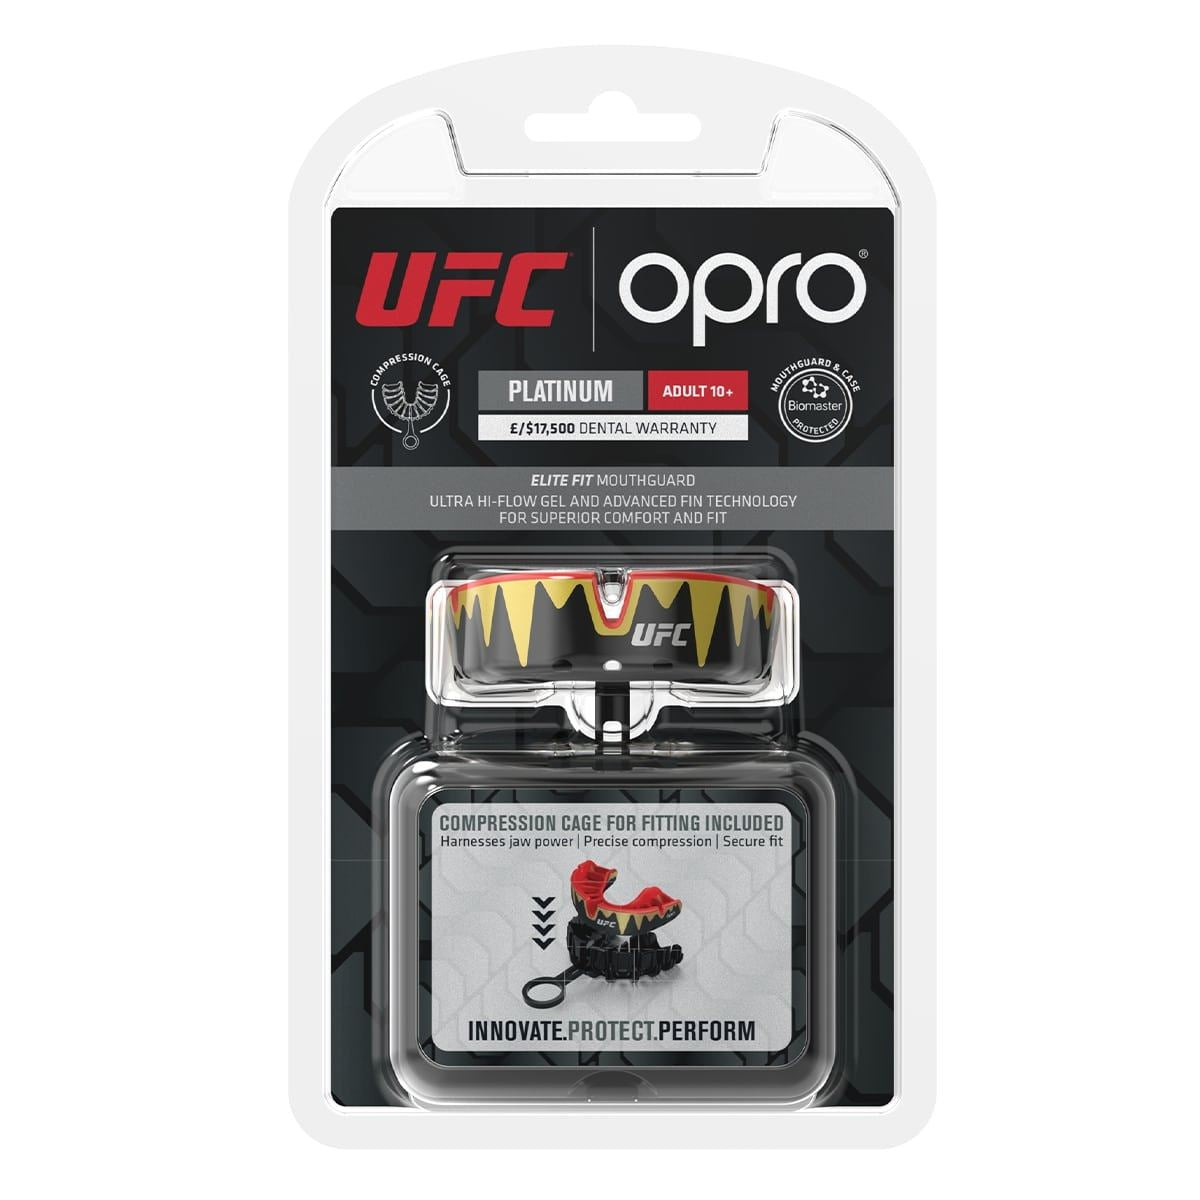 Men's Rugby Protective Mouthguard Opro Self-Fit Platinum UFC 2022 Black/Gold/Red Alternate 1